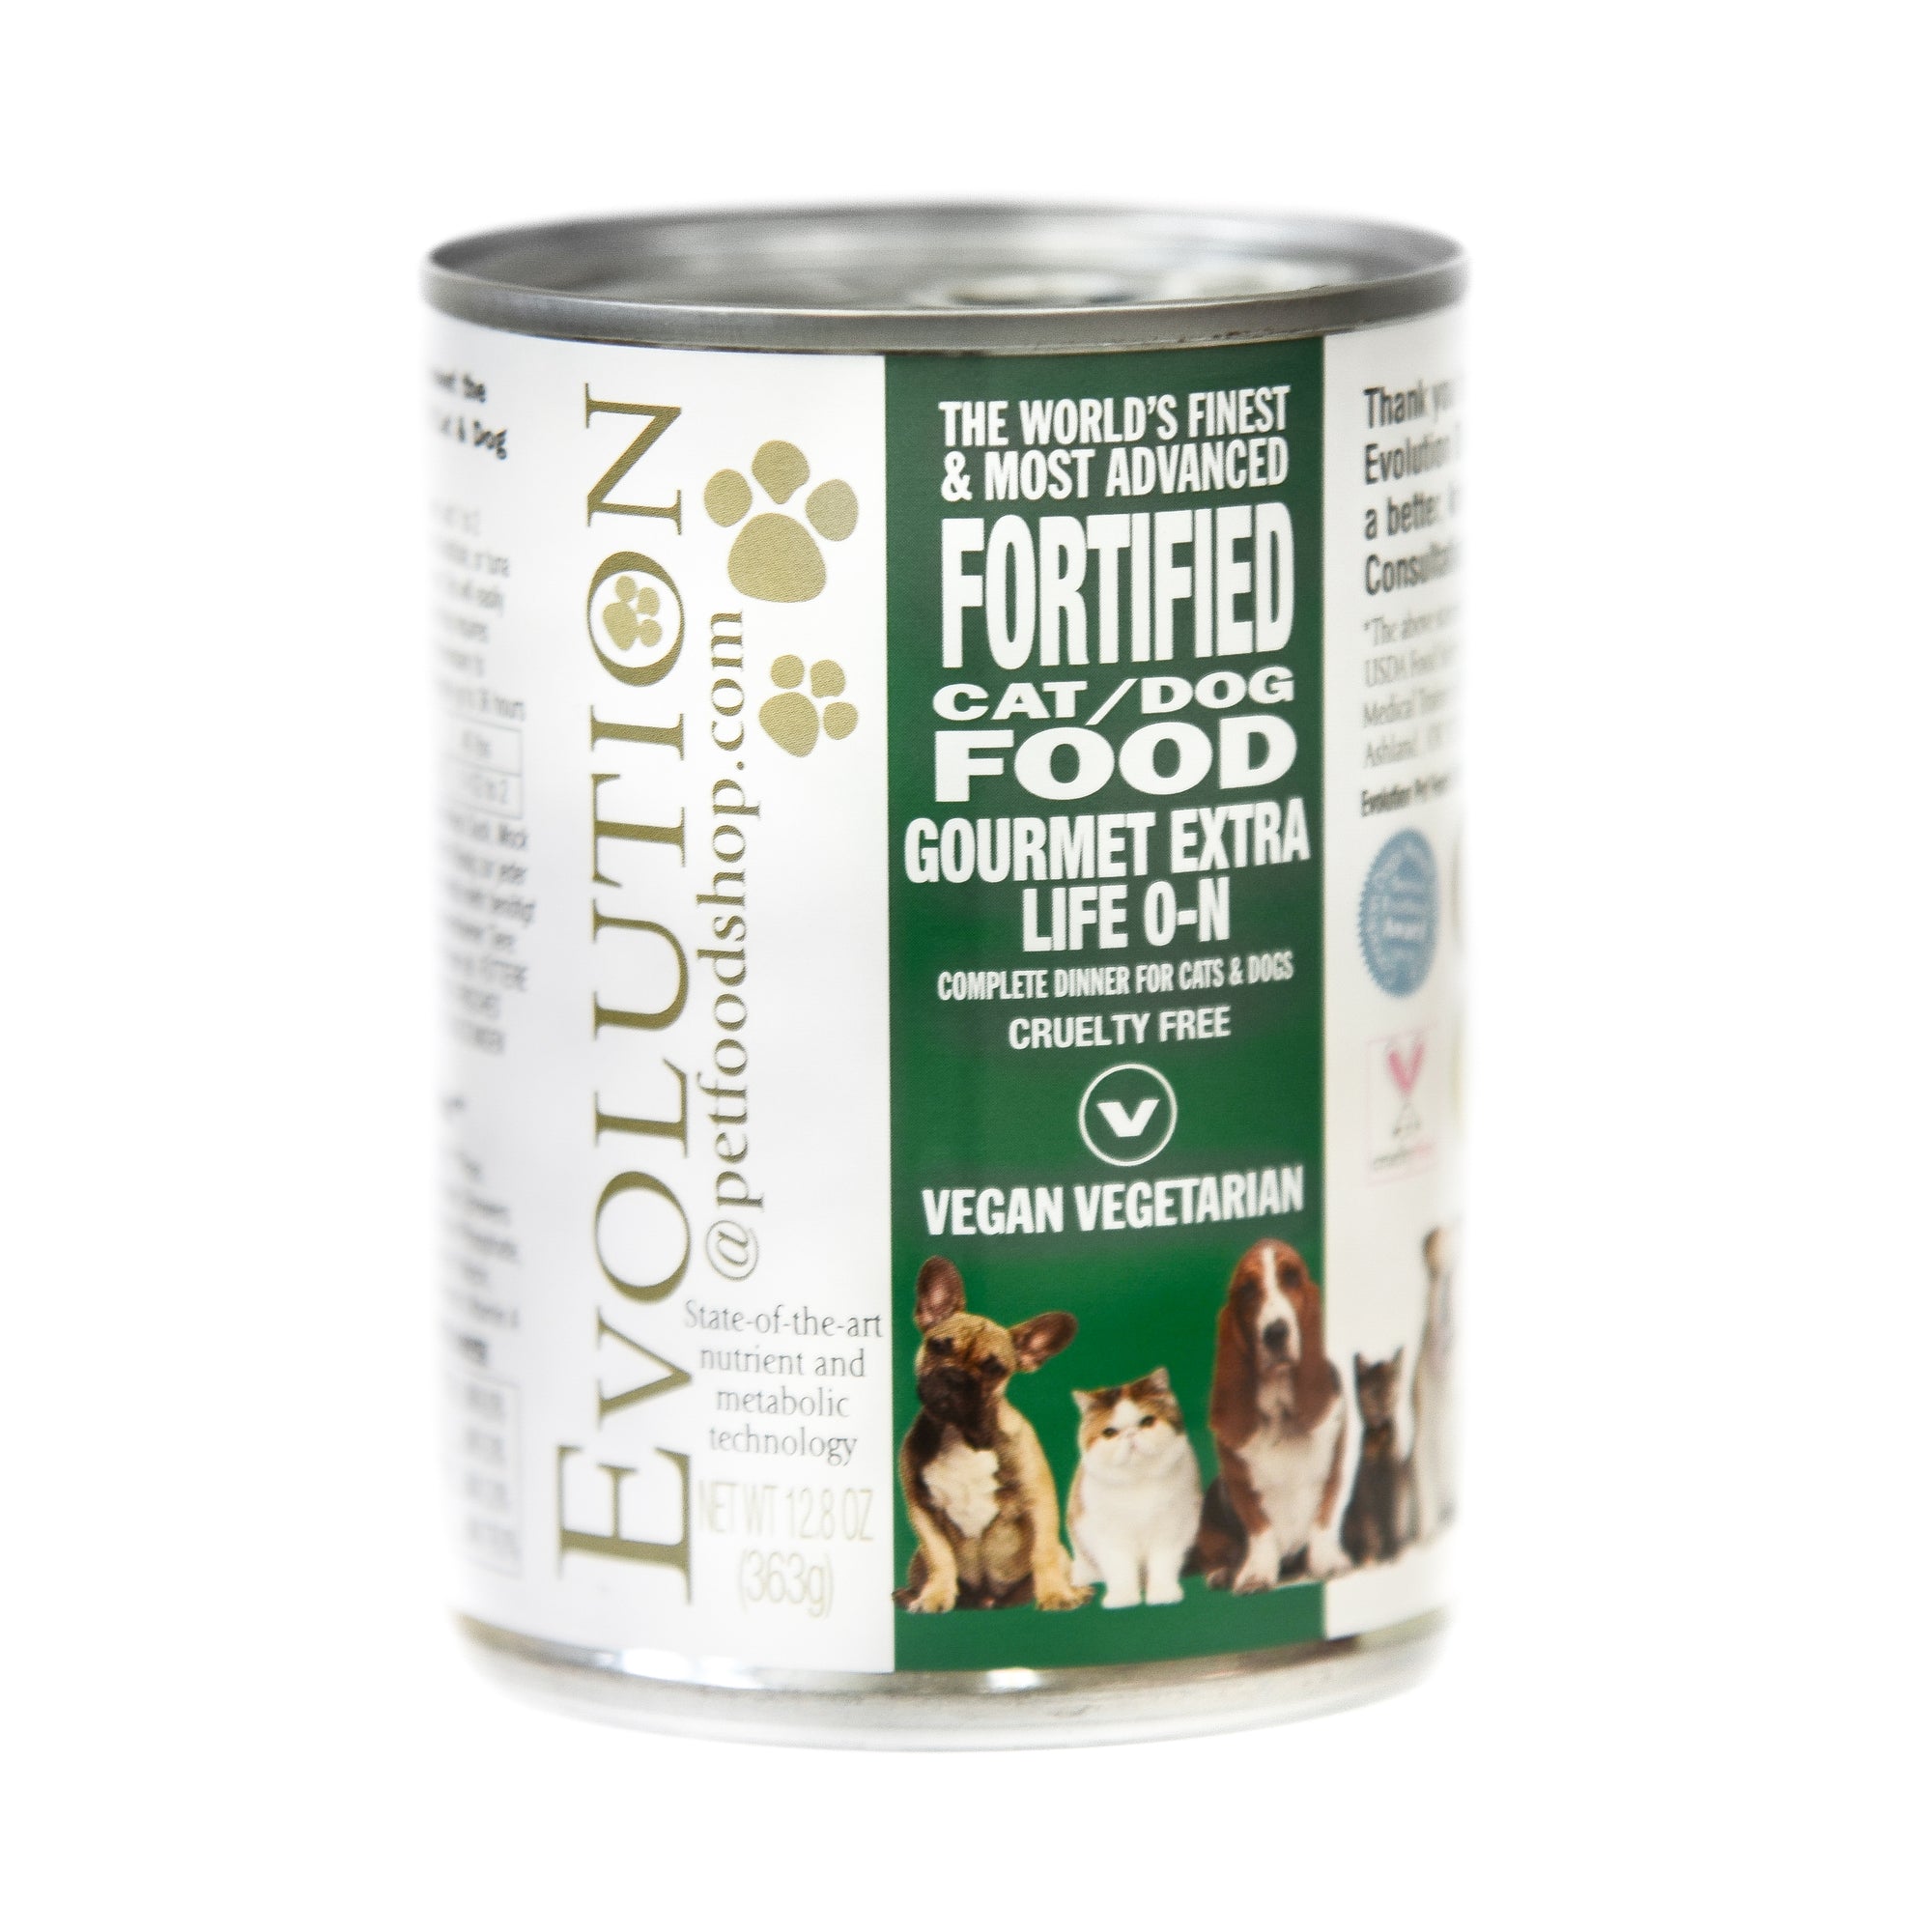 Nature's Variety Dog Food Review - Whole Dog Journal